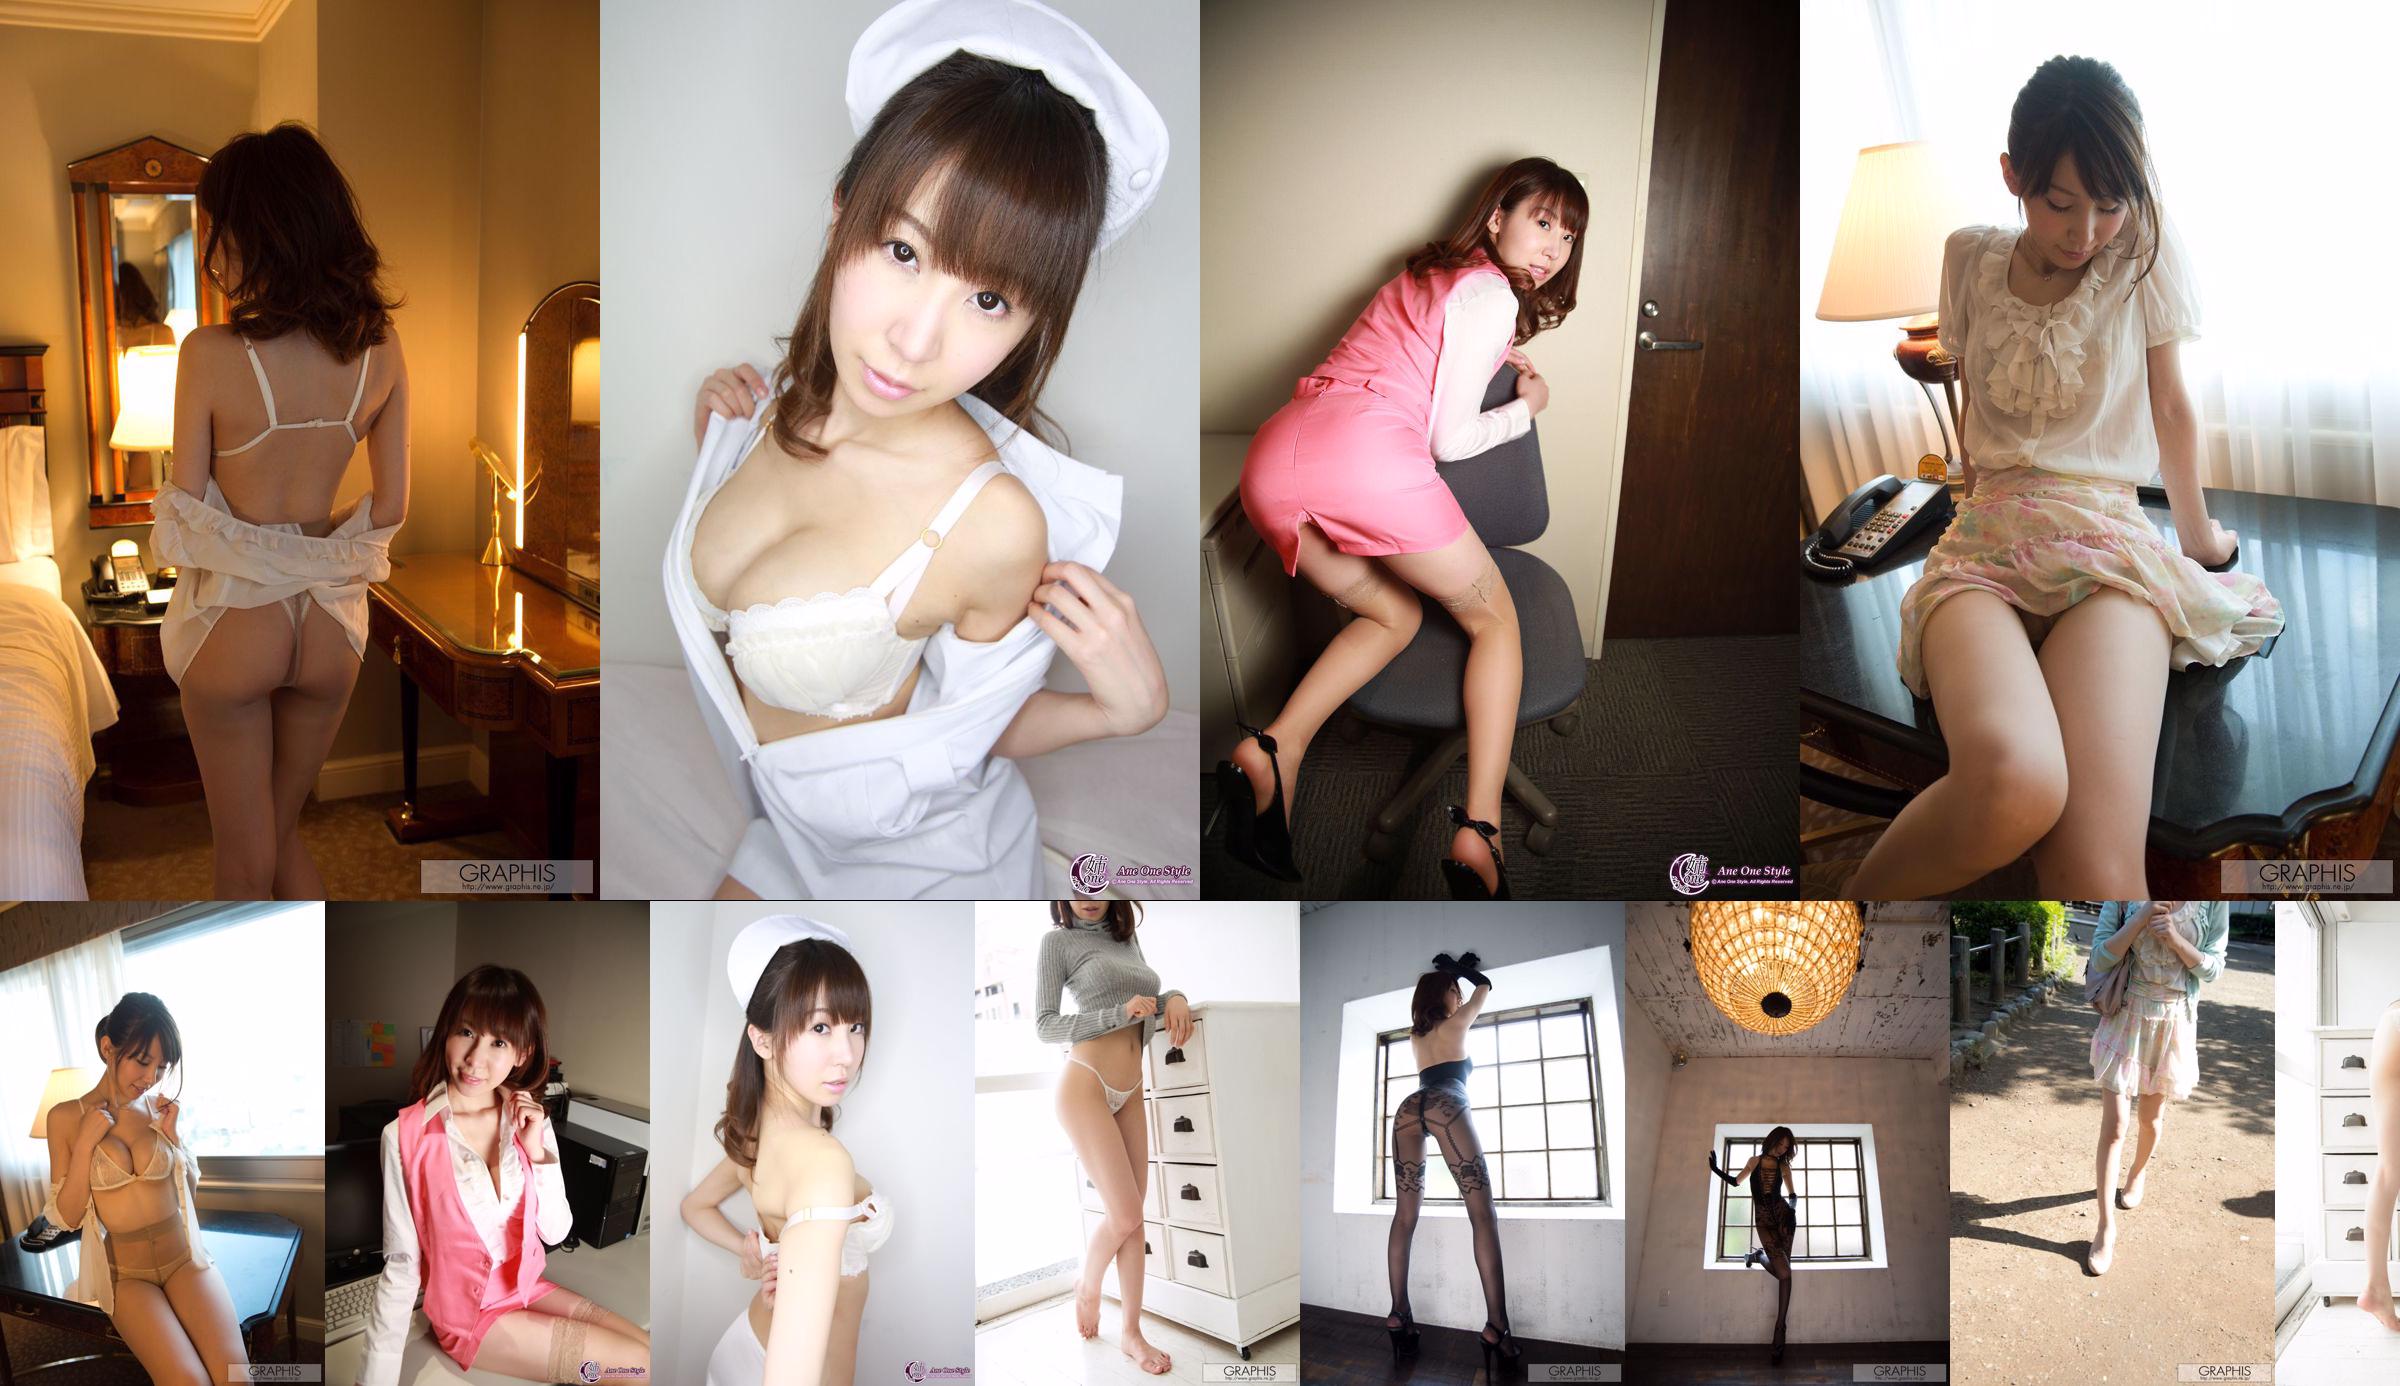 [X-City] Ane One Style No.73 Meisa Chibana / Meisa Chibana No.81be21 Page 15